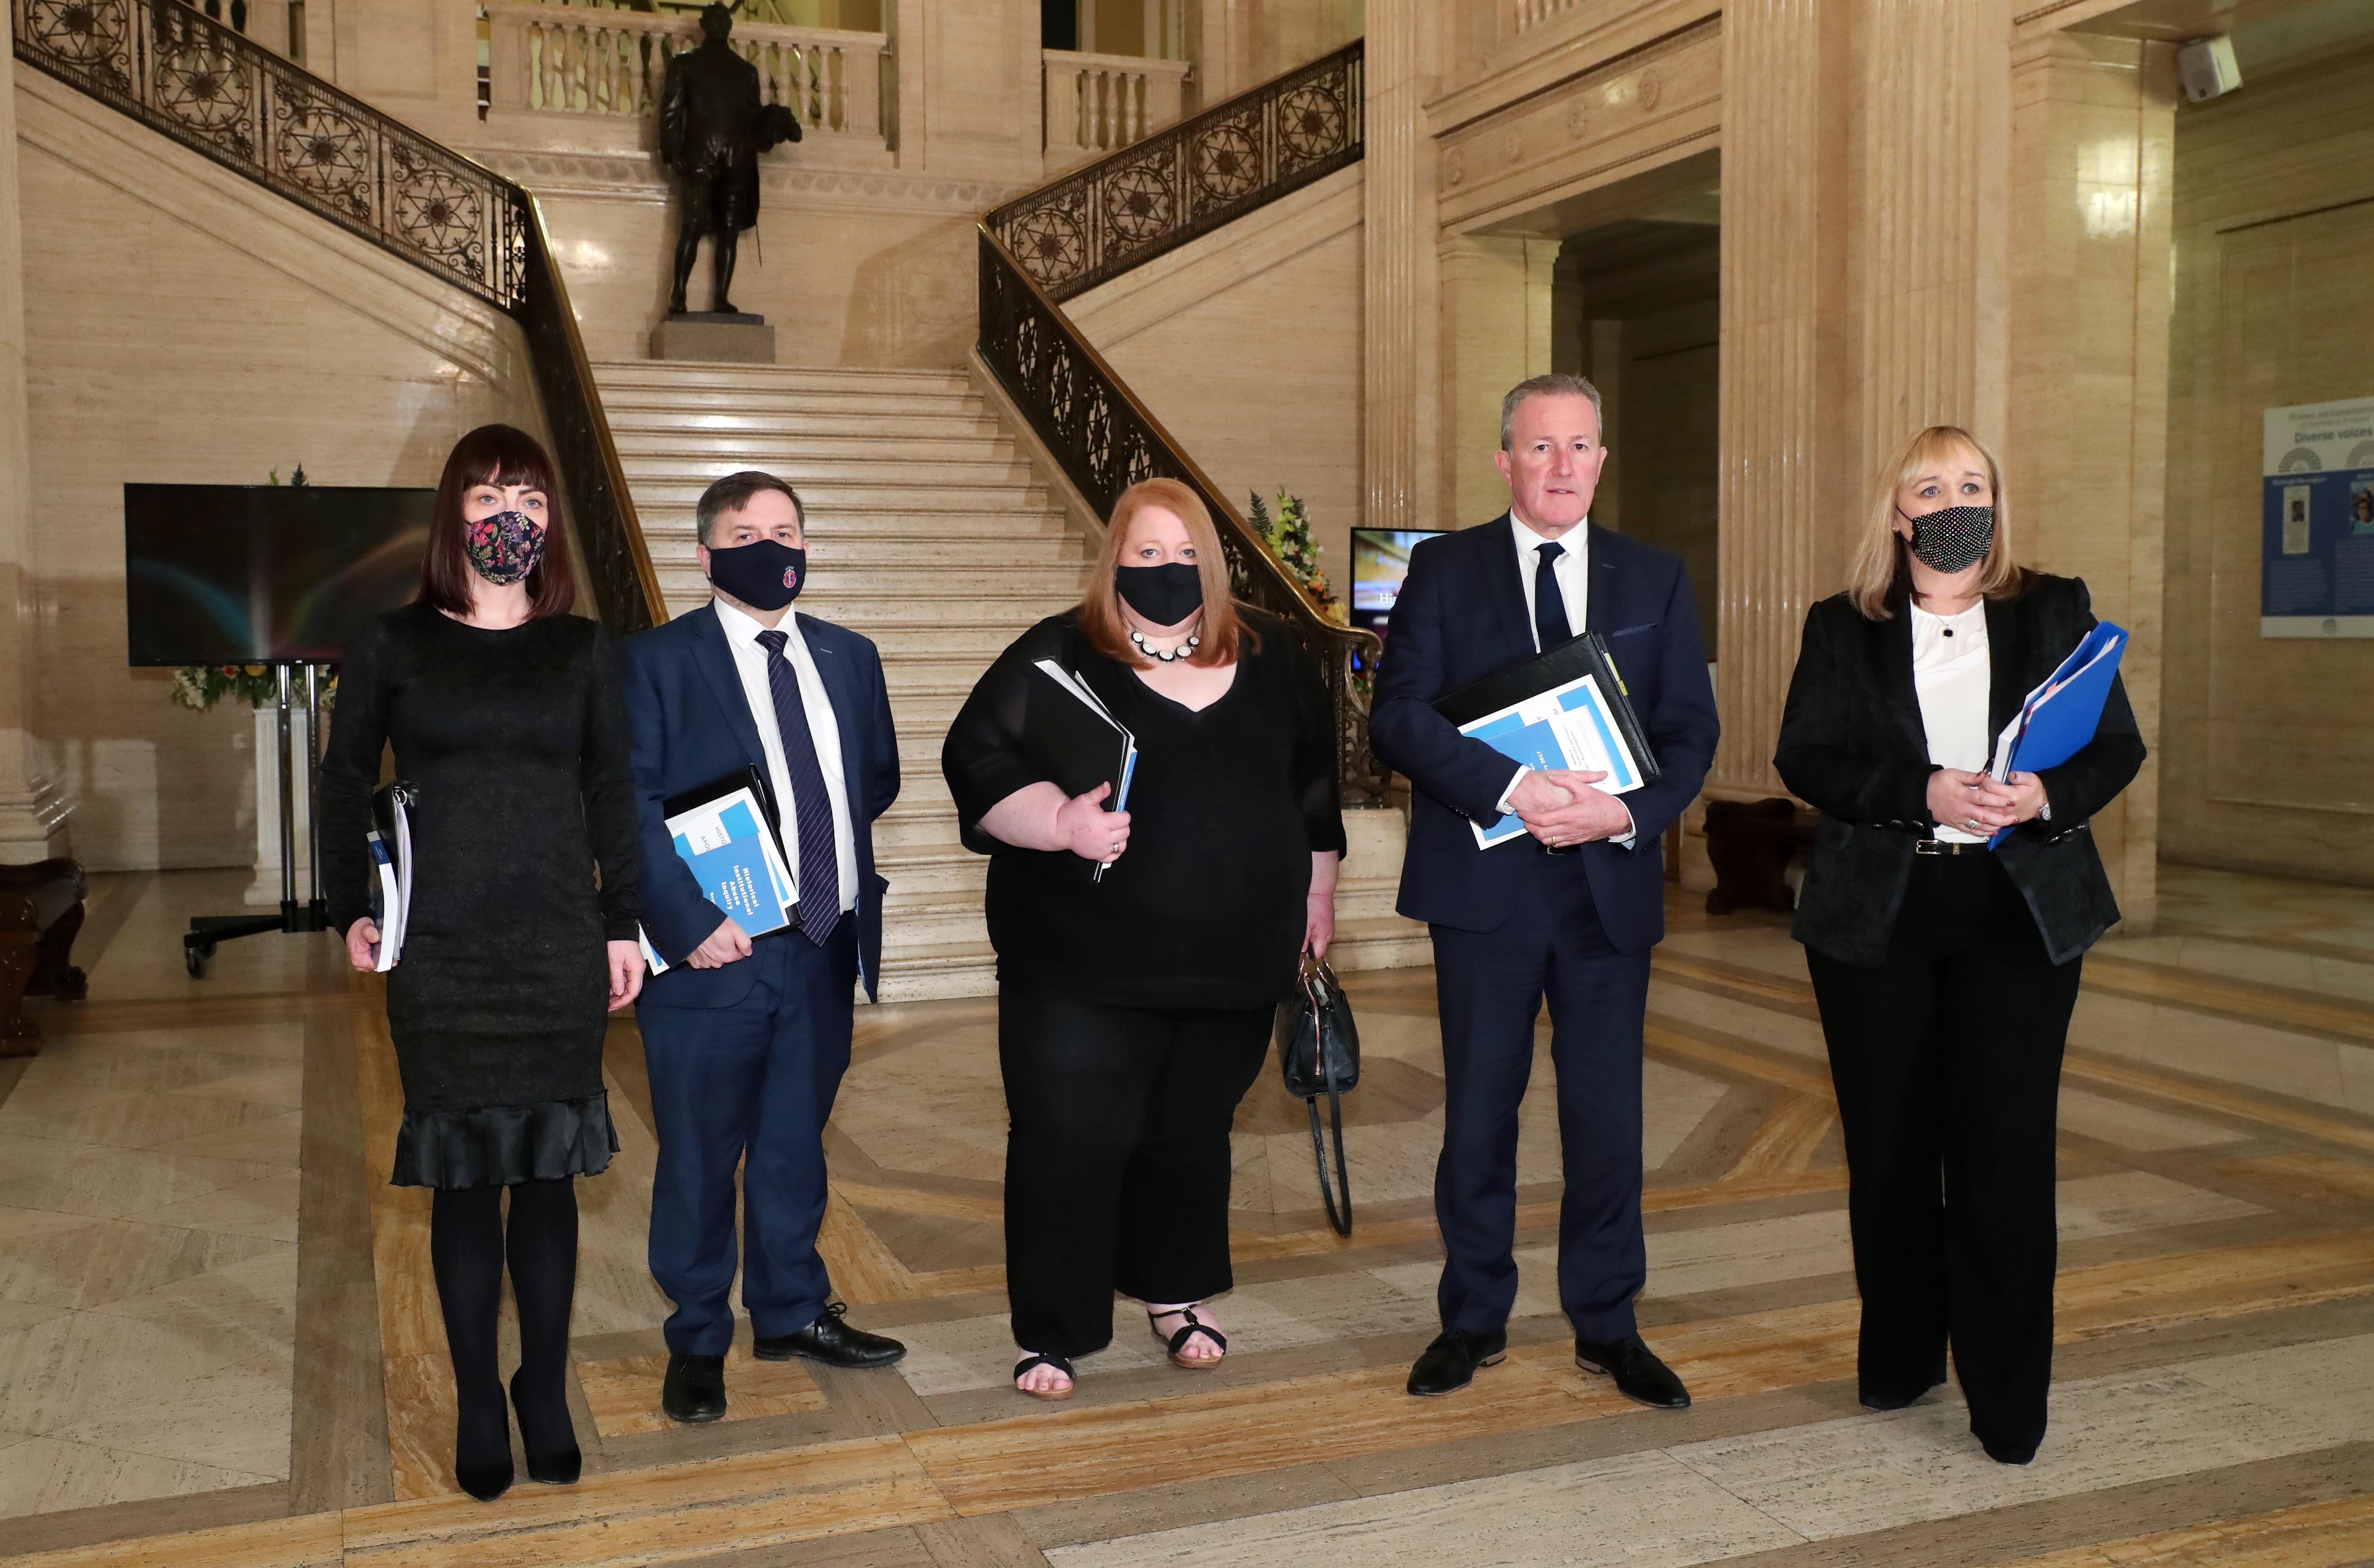 APOLOGY: Ministers Nichola Mallon, Robin Swann, Naomi Long, Conor Murphy and Michelle McIlveen